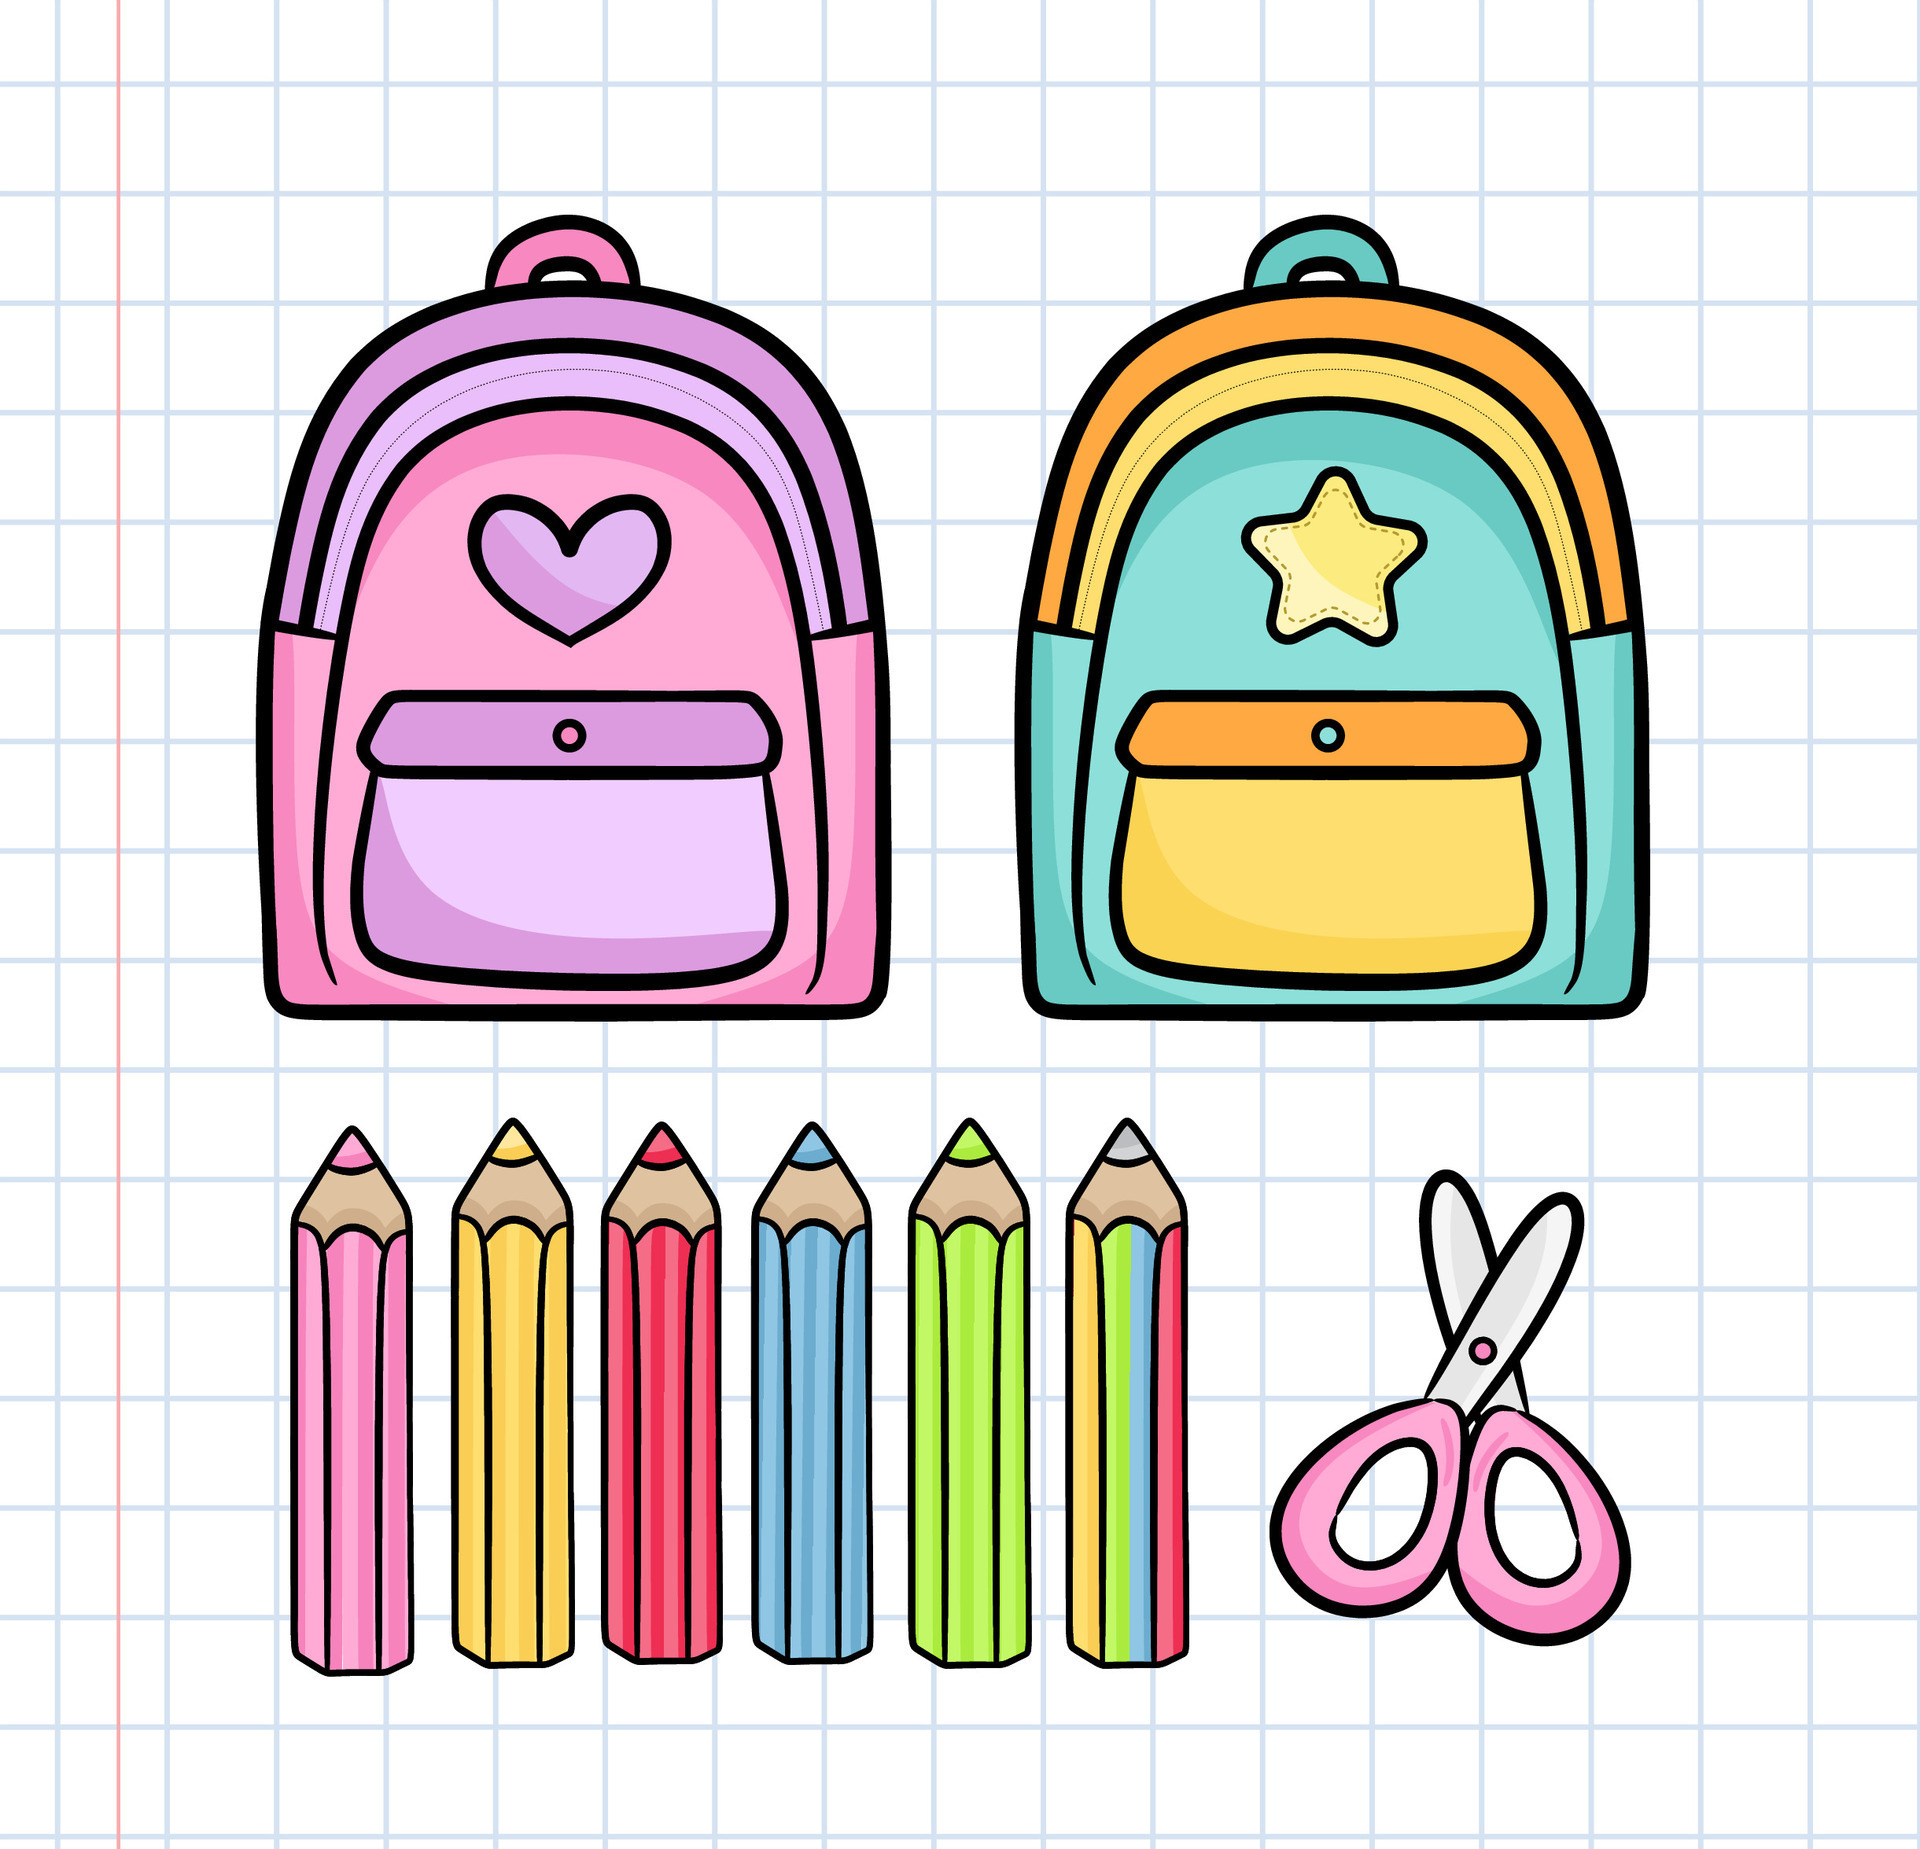 Back to school typography vector illustration colorful modern and school  items elements decoration background. 10564623 Vector Art at Vecteezy